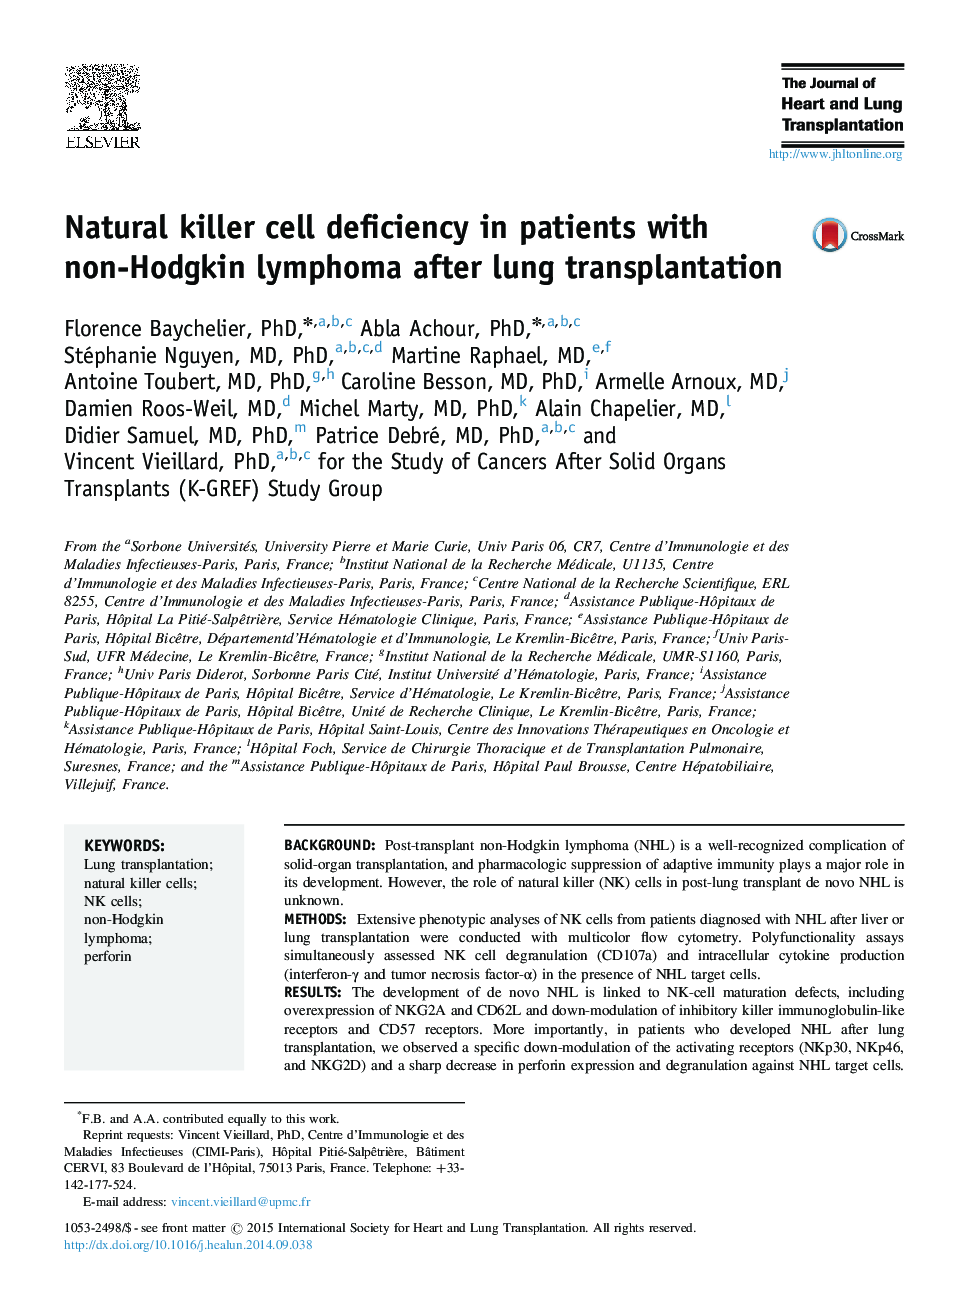 Natural killer cell deficiency in patients with non-Hodgkin lymphoma after lung transplantation